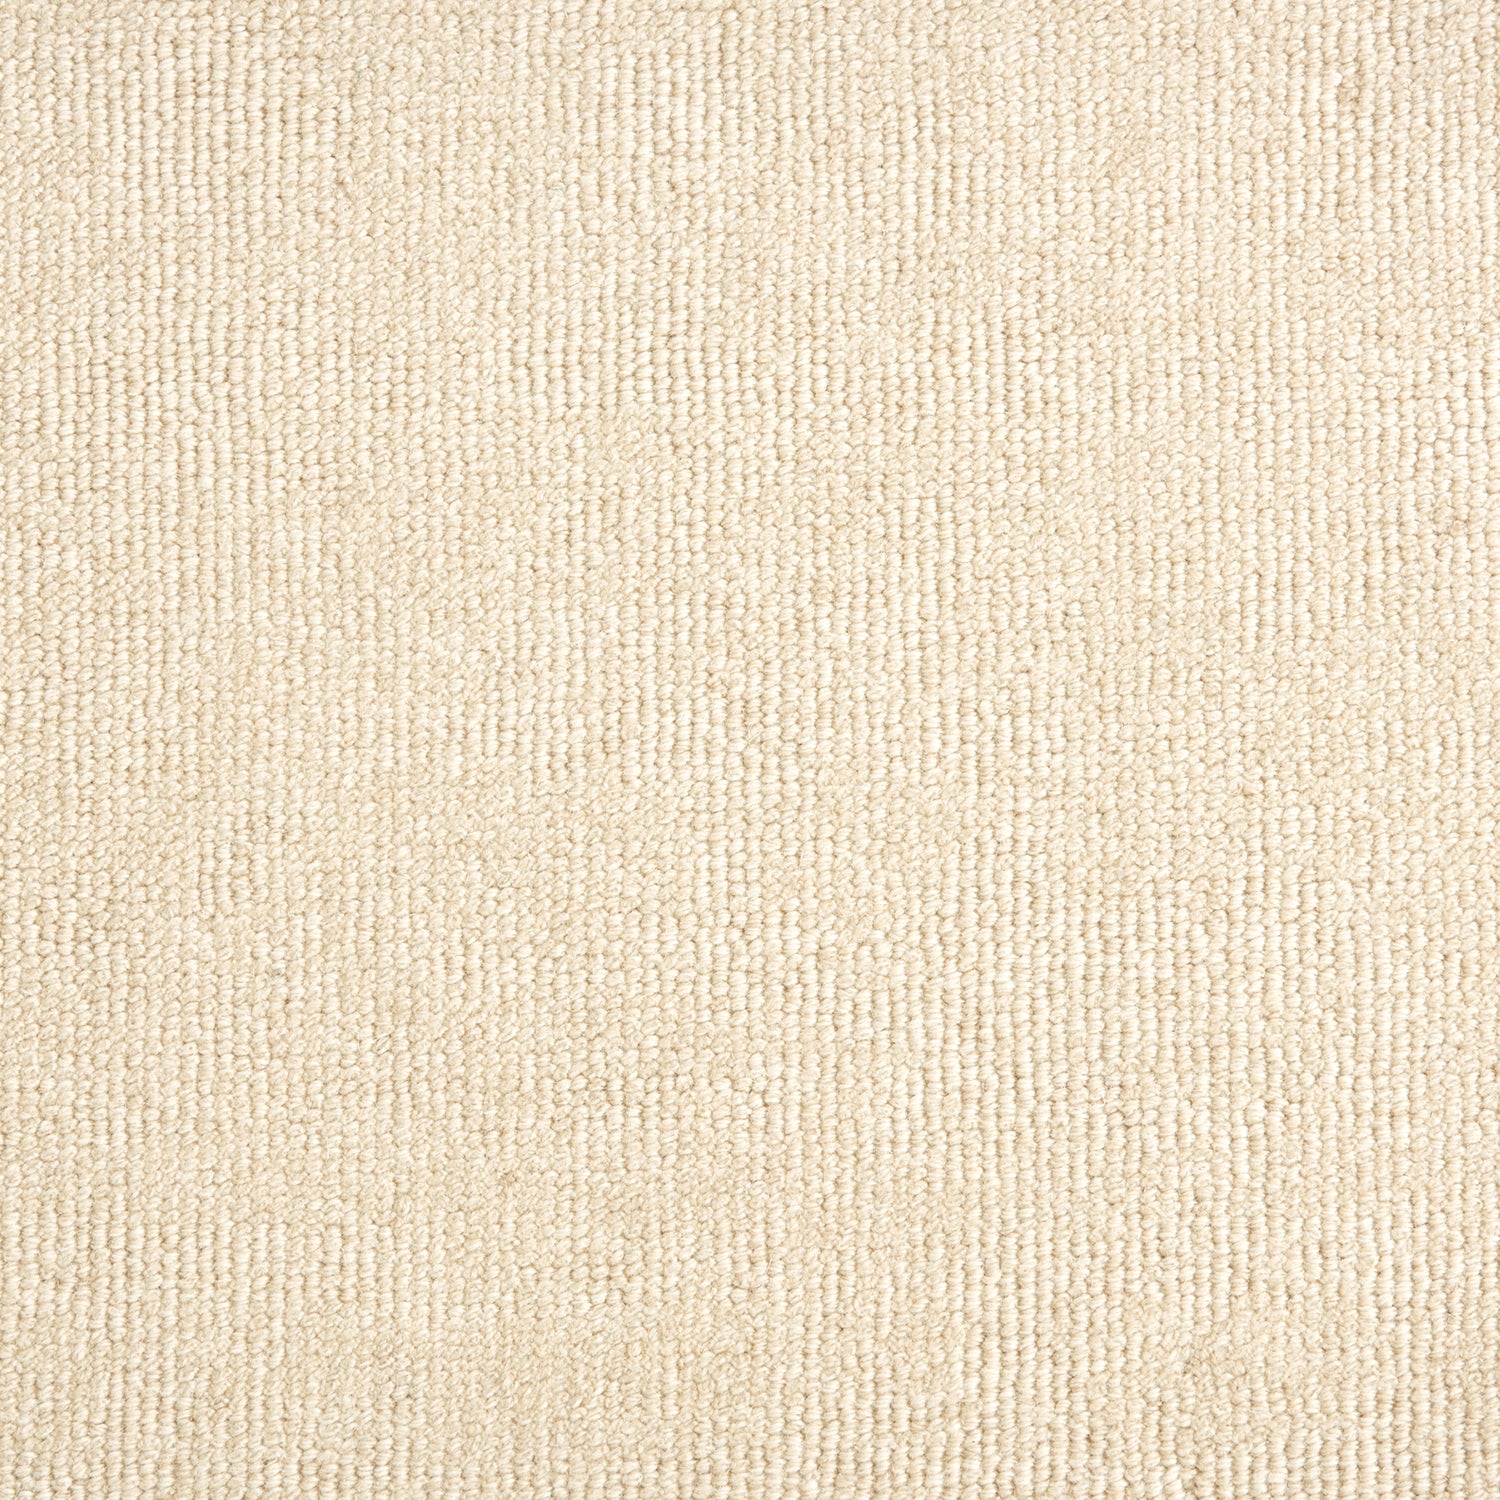 Wool broadloom carpet swatch in a textured weave in mottled white and cream.